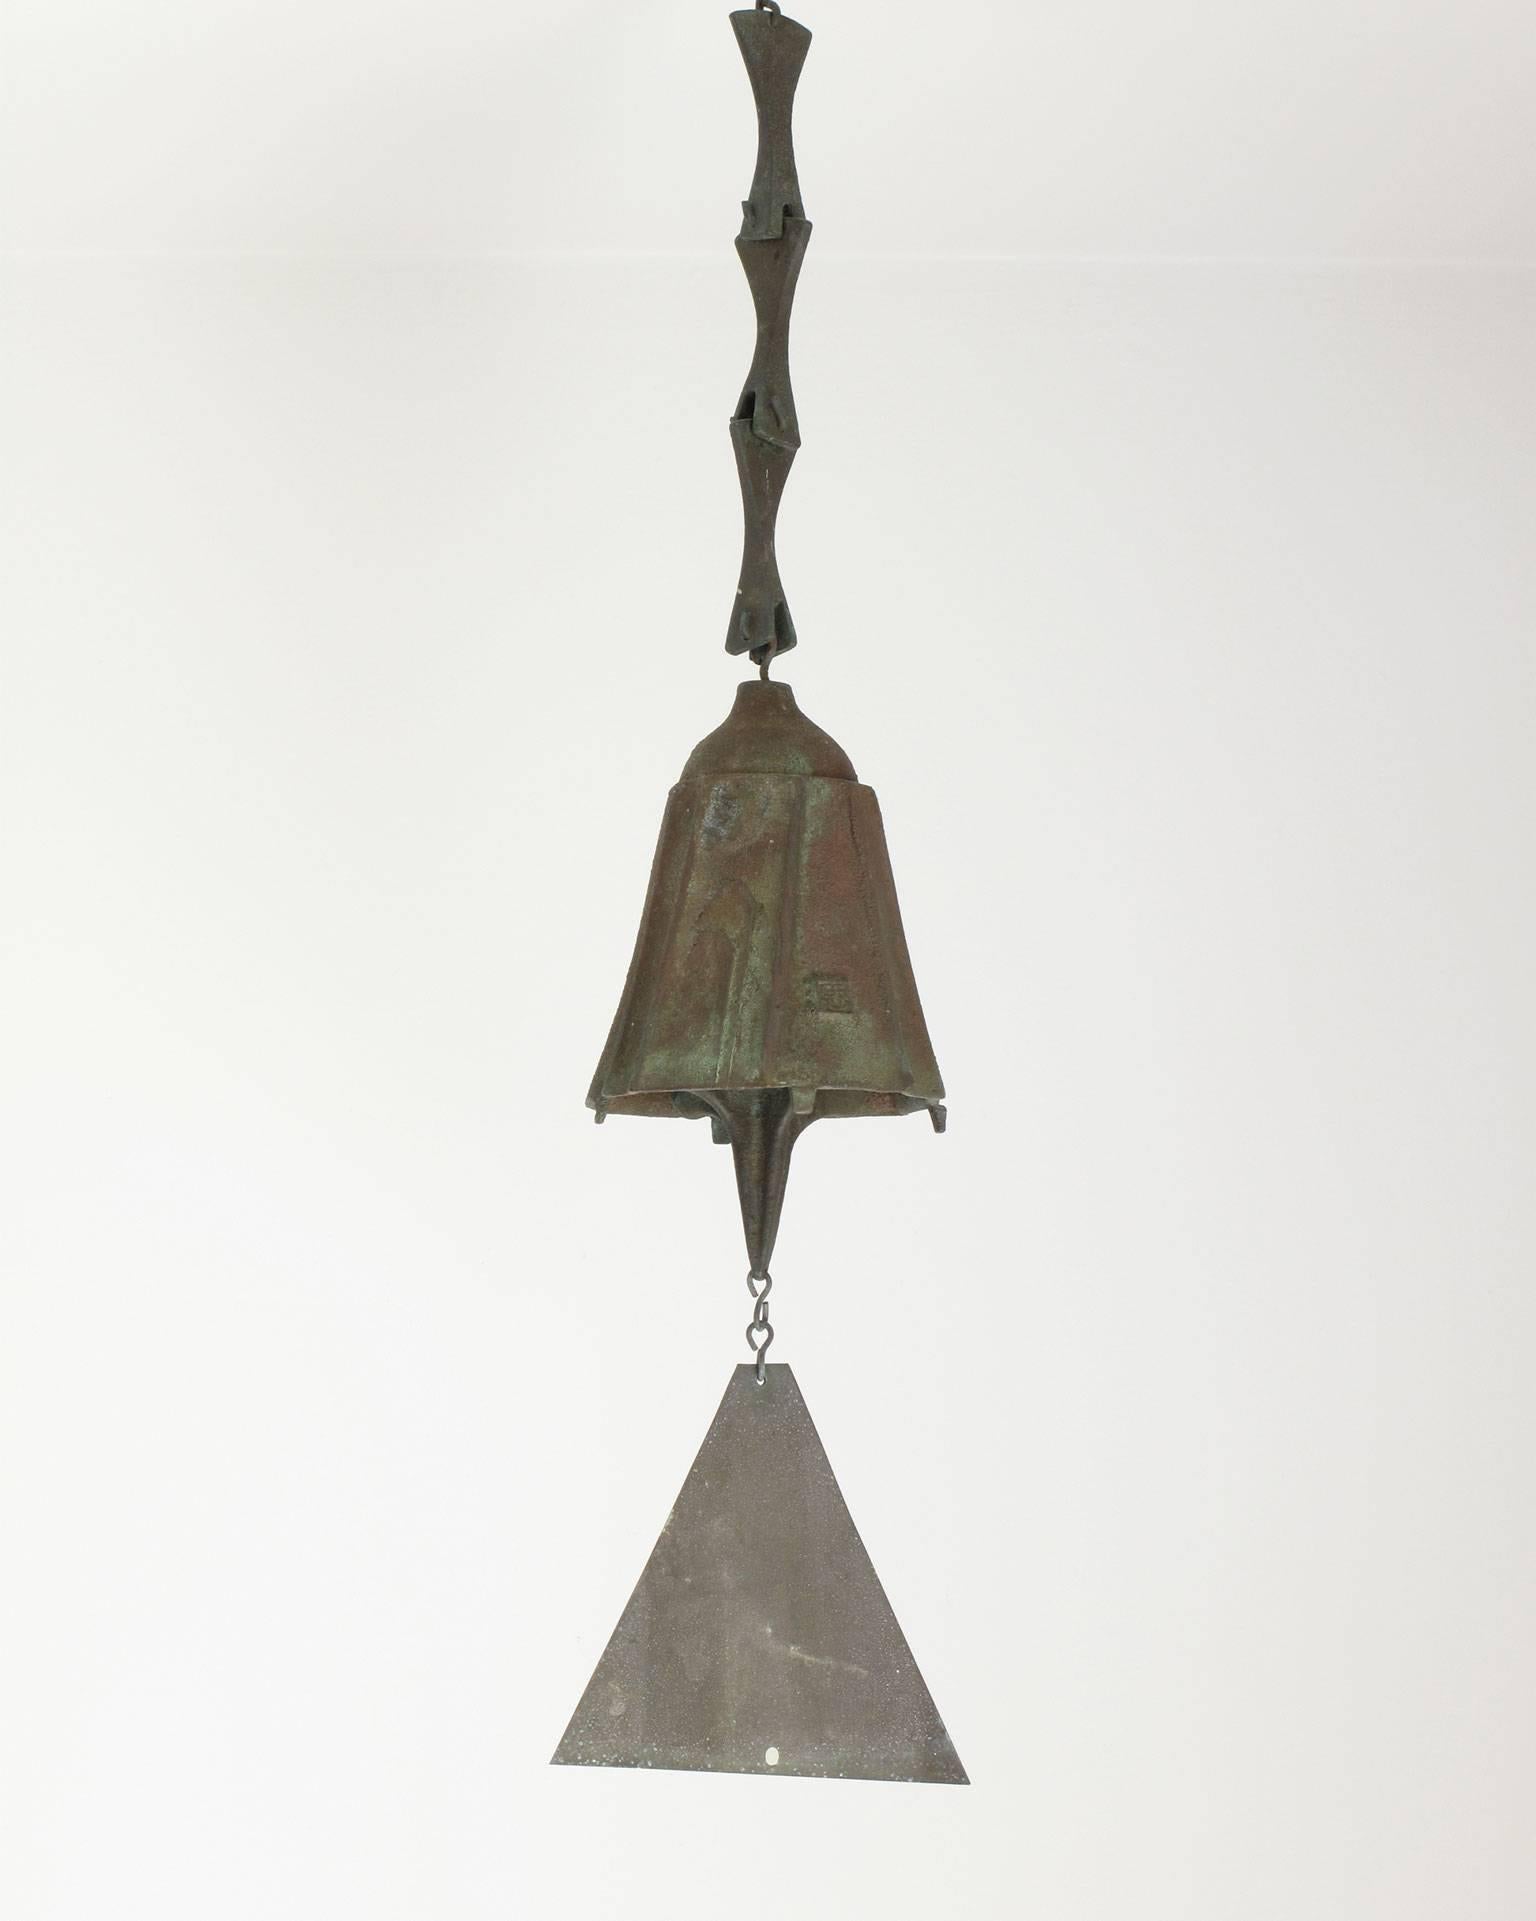 Paolo Soleri
Wind chime bell, solid cast bronze, heavily patinated surface
Signed with Arcosanti square emblem
Arizona, 1970s
Dimensions: 23.5 high x 5 diameter inches
Condition: Good vintage, fascinating patina
 